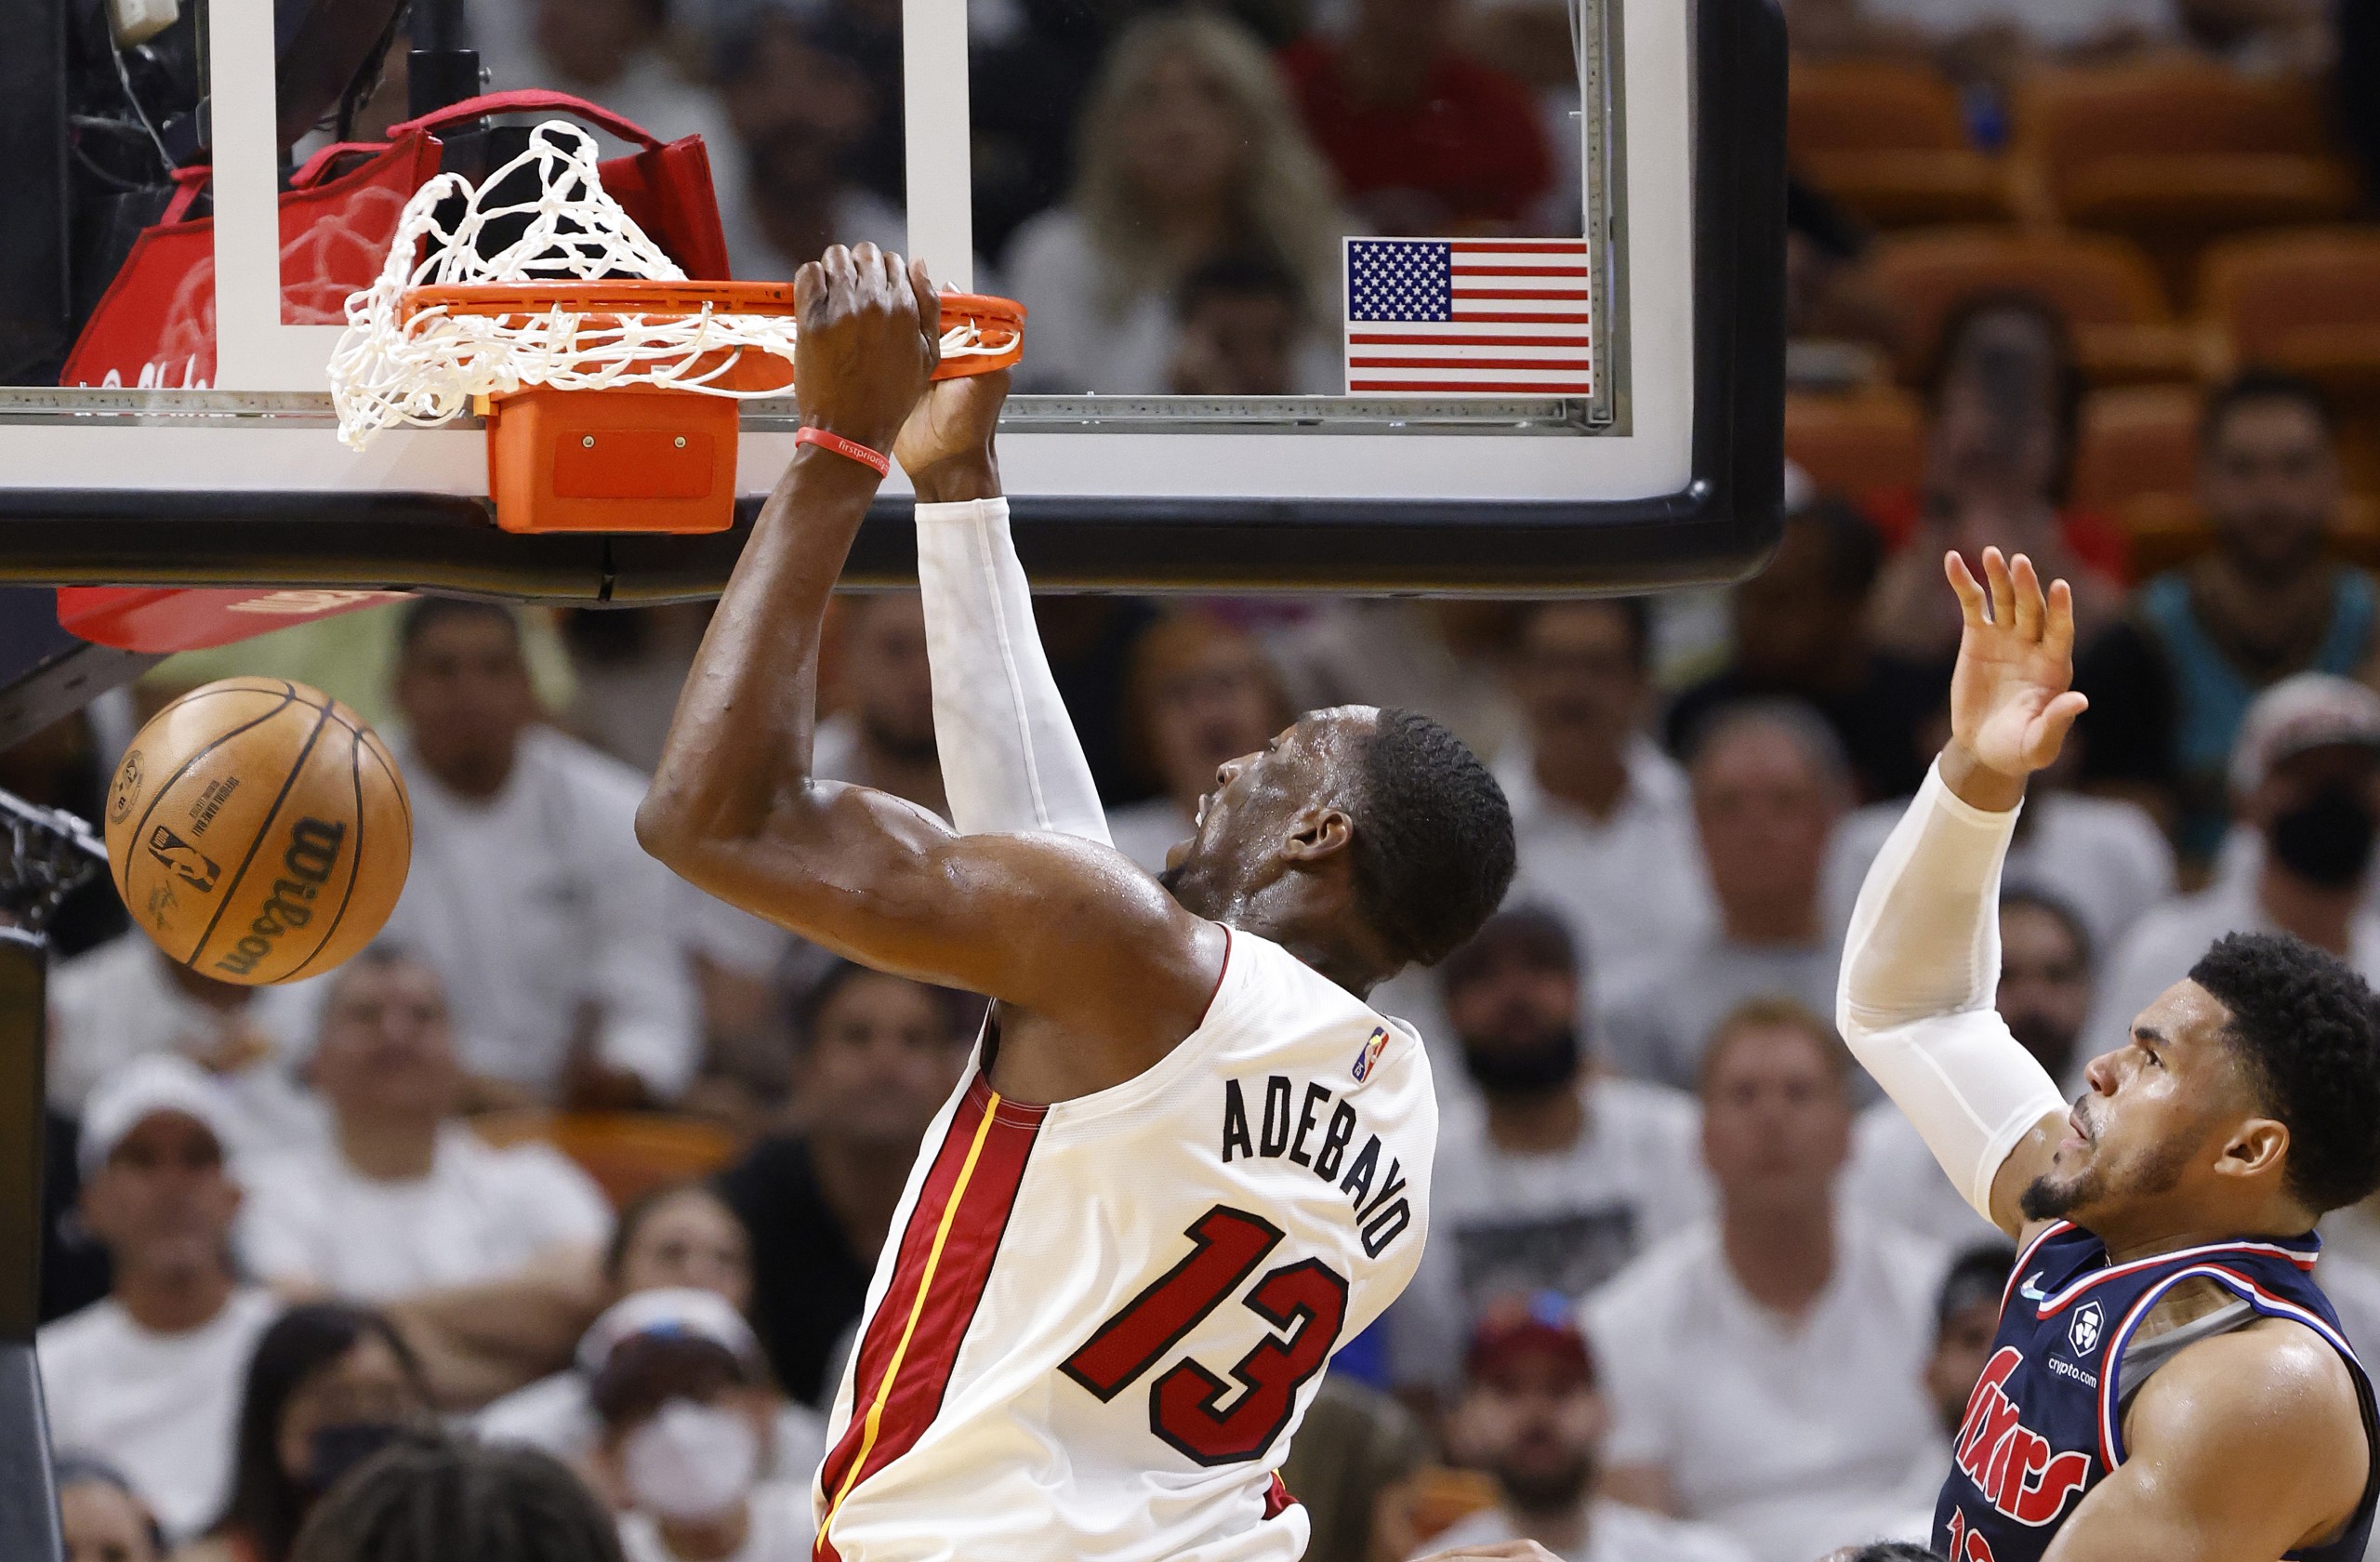 epa09923722 Miami Heat center Bam Adebayo (L) dunks around Philadelphia 76ers forward Tobias Harris (R) during the second half of game one of the NBA Eastern Conference semifinals series between the Miami Heat and the Philadelphia 76ers at FTX Arena in Miami, Florida, USA, 02 May 2022.  EPA/RHONA WISE  SHUTTERSTOCK OUT